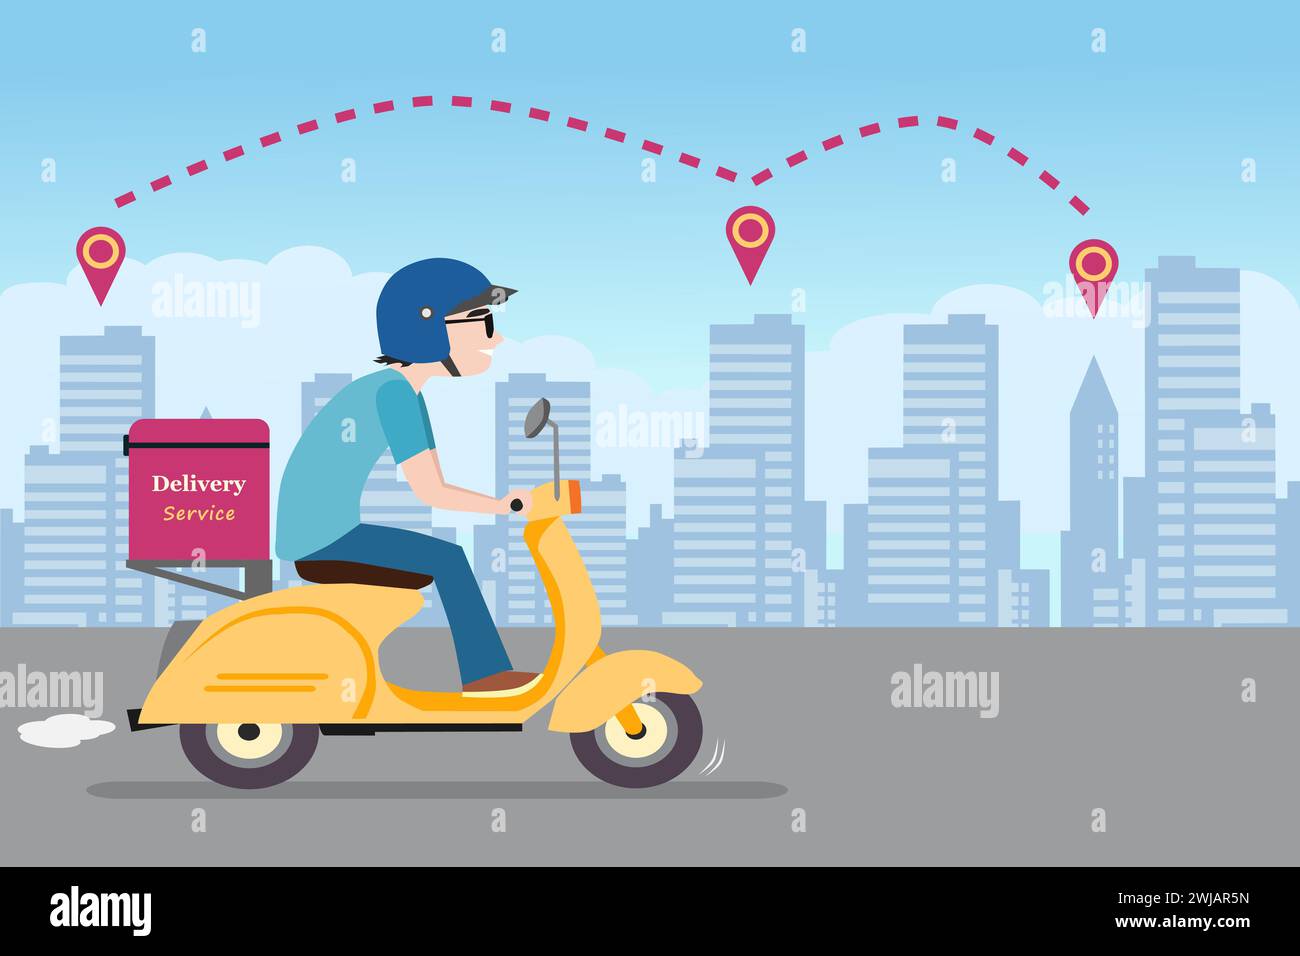 Delivery service scooter man vector illustration with buildings in background. Stock Vector